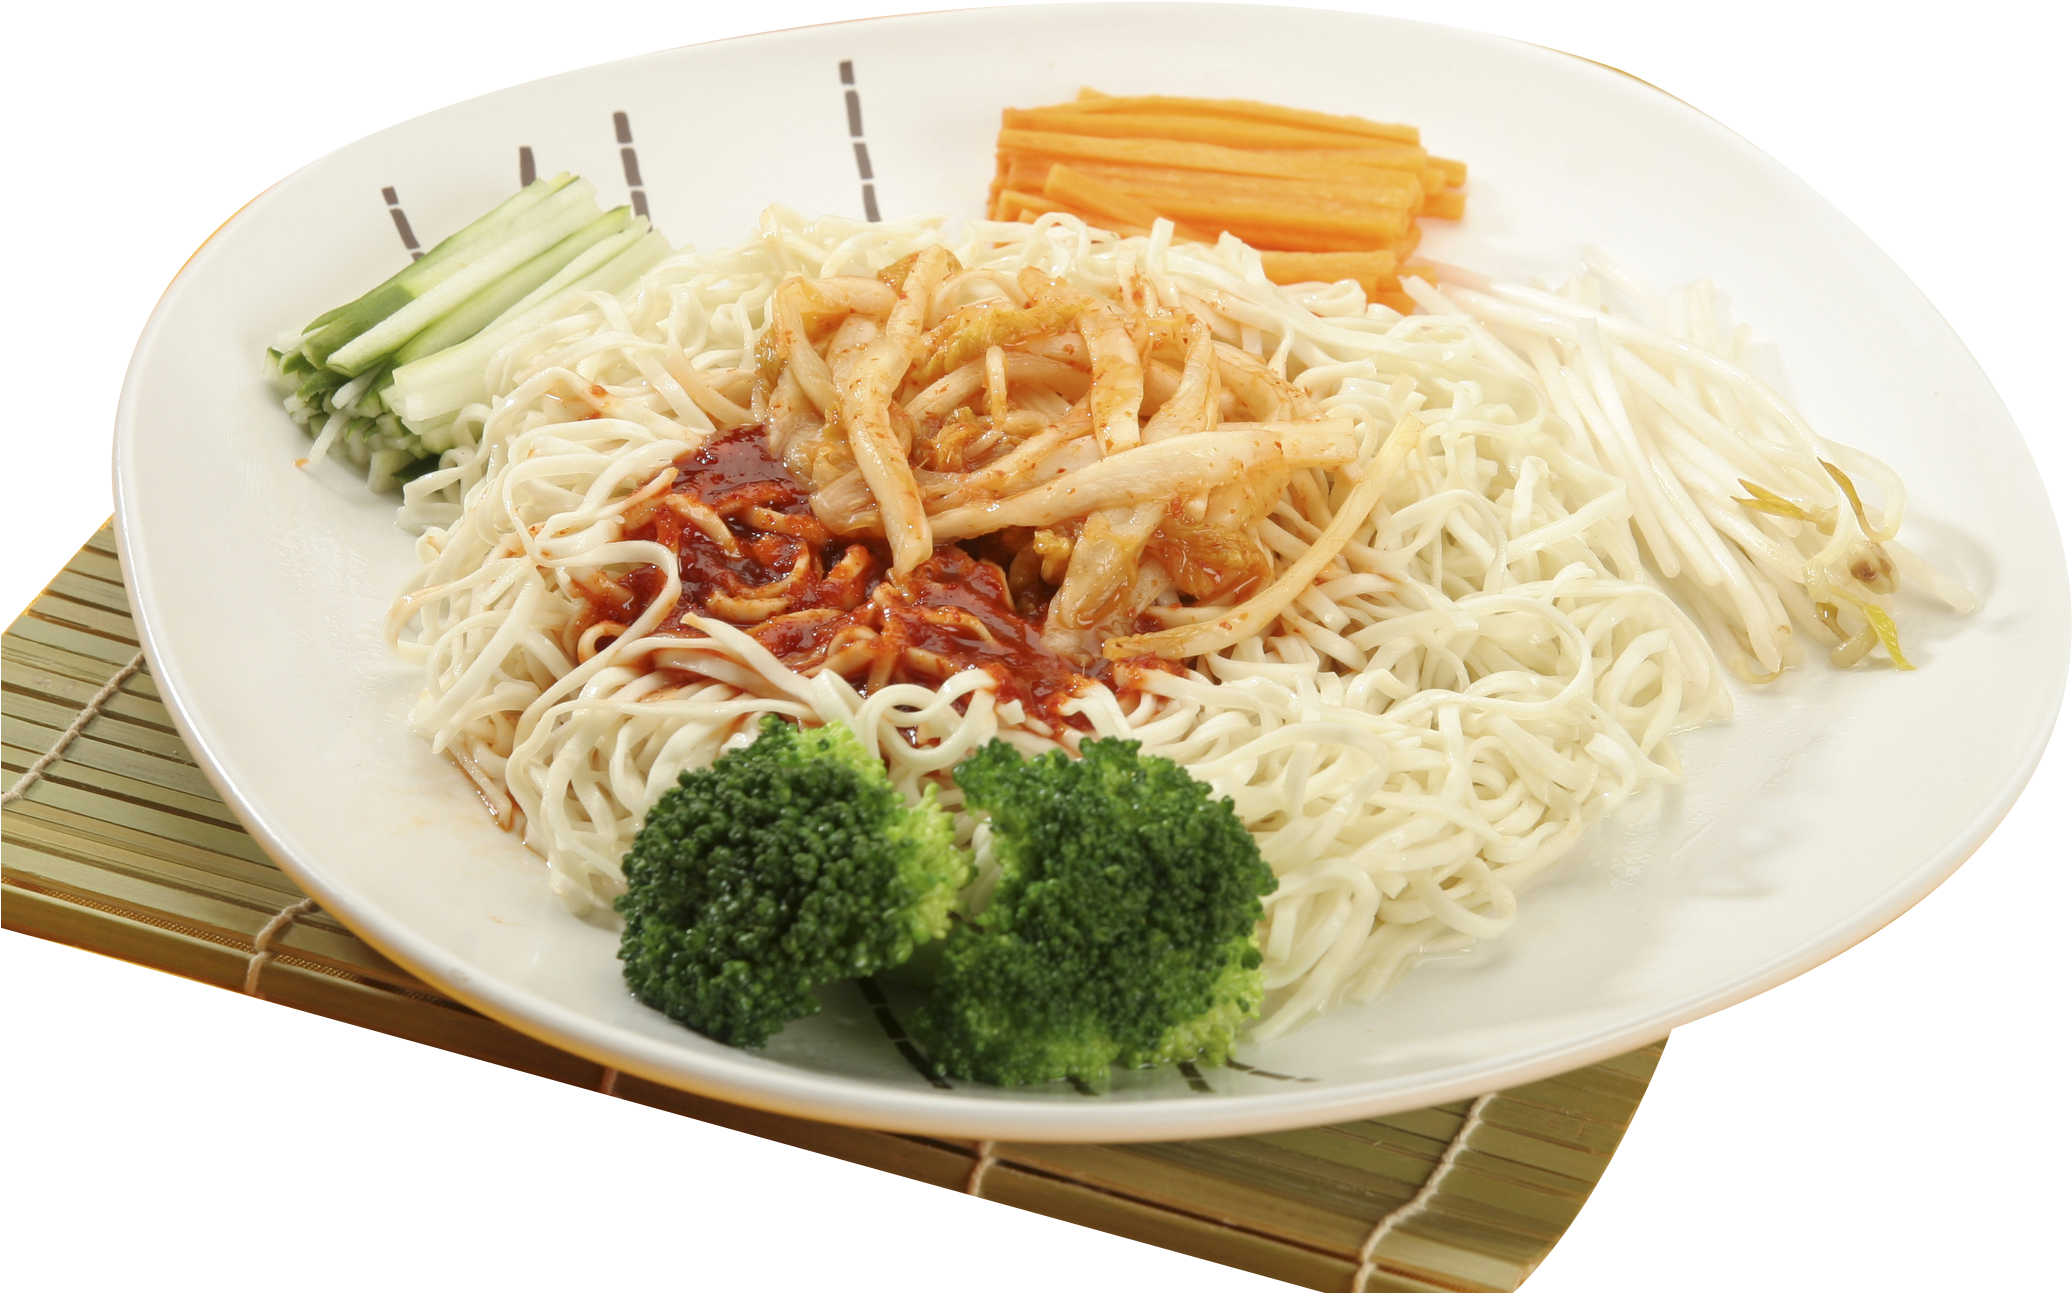 A Plate Of Noodles And Vegetables